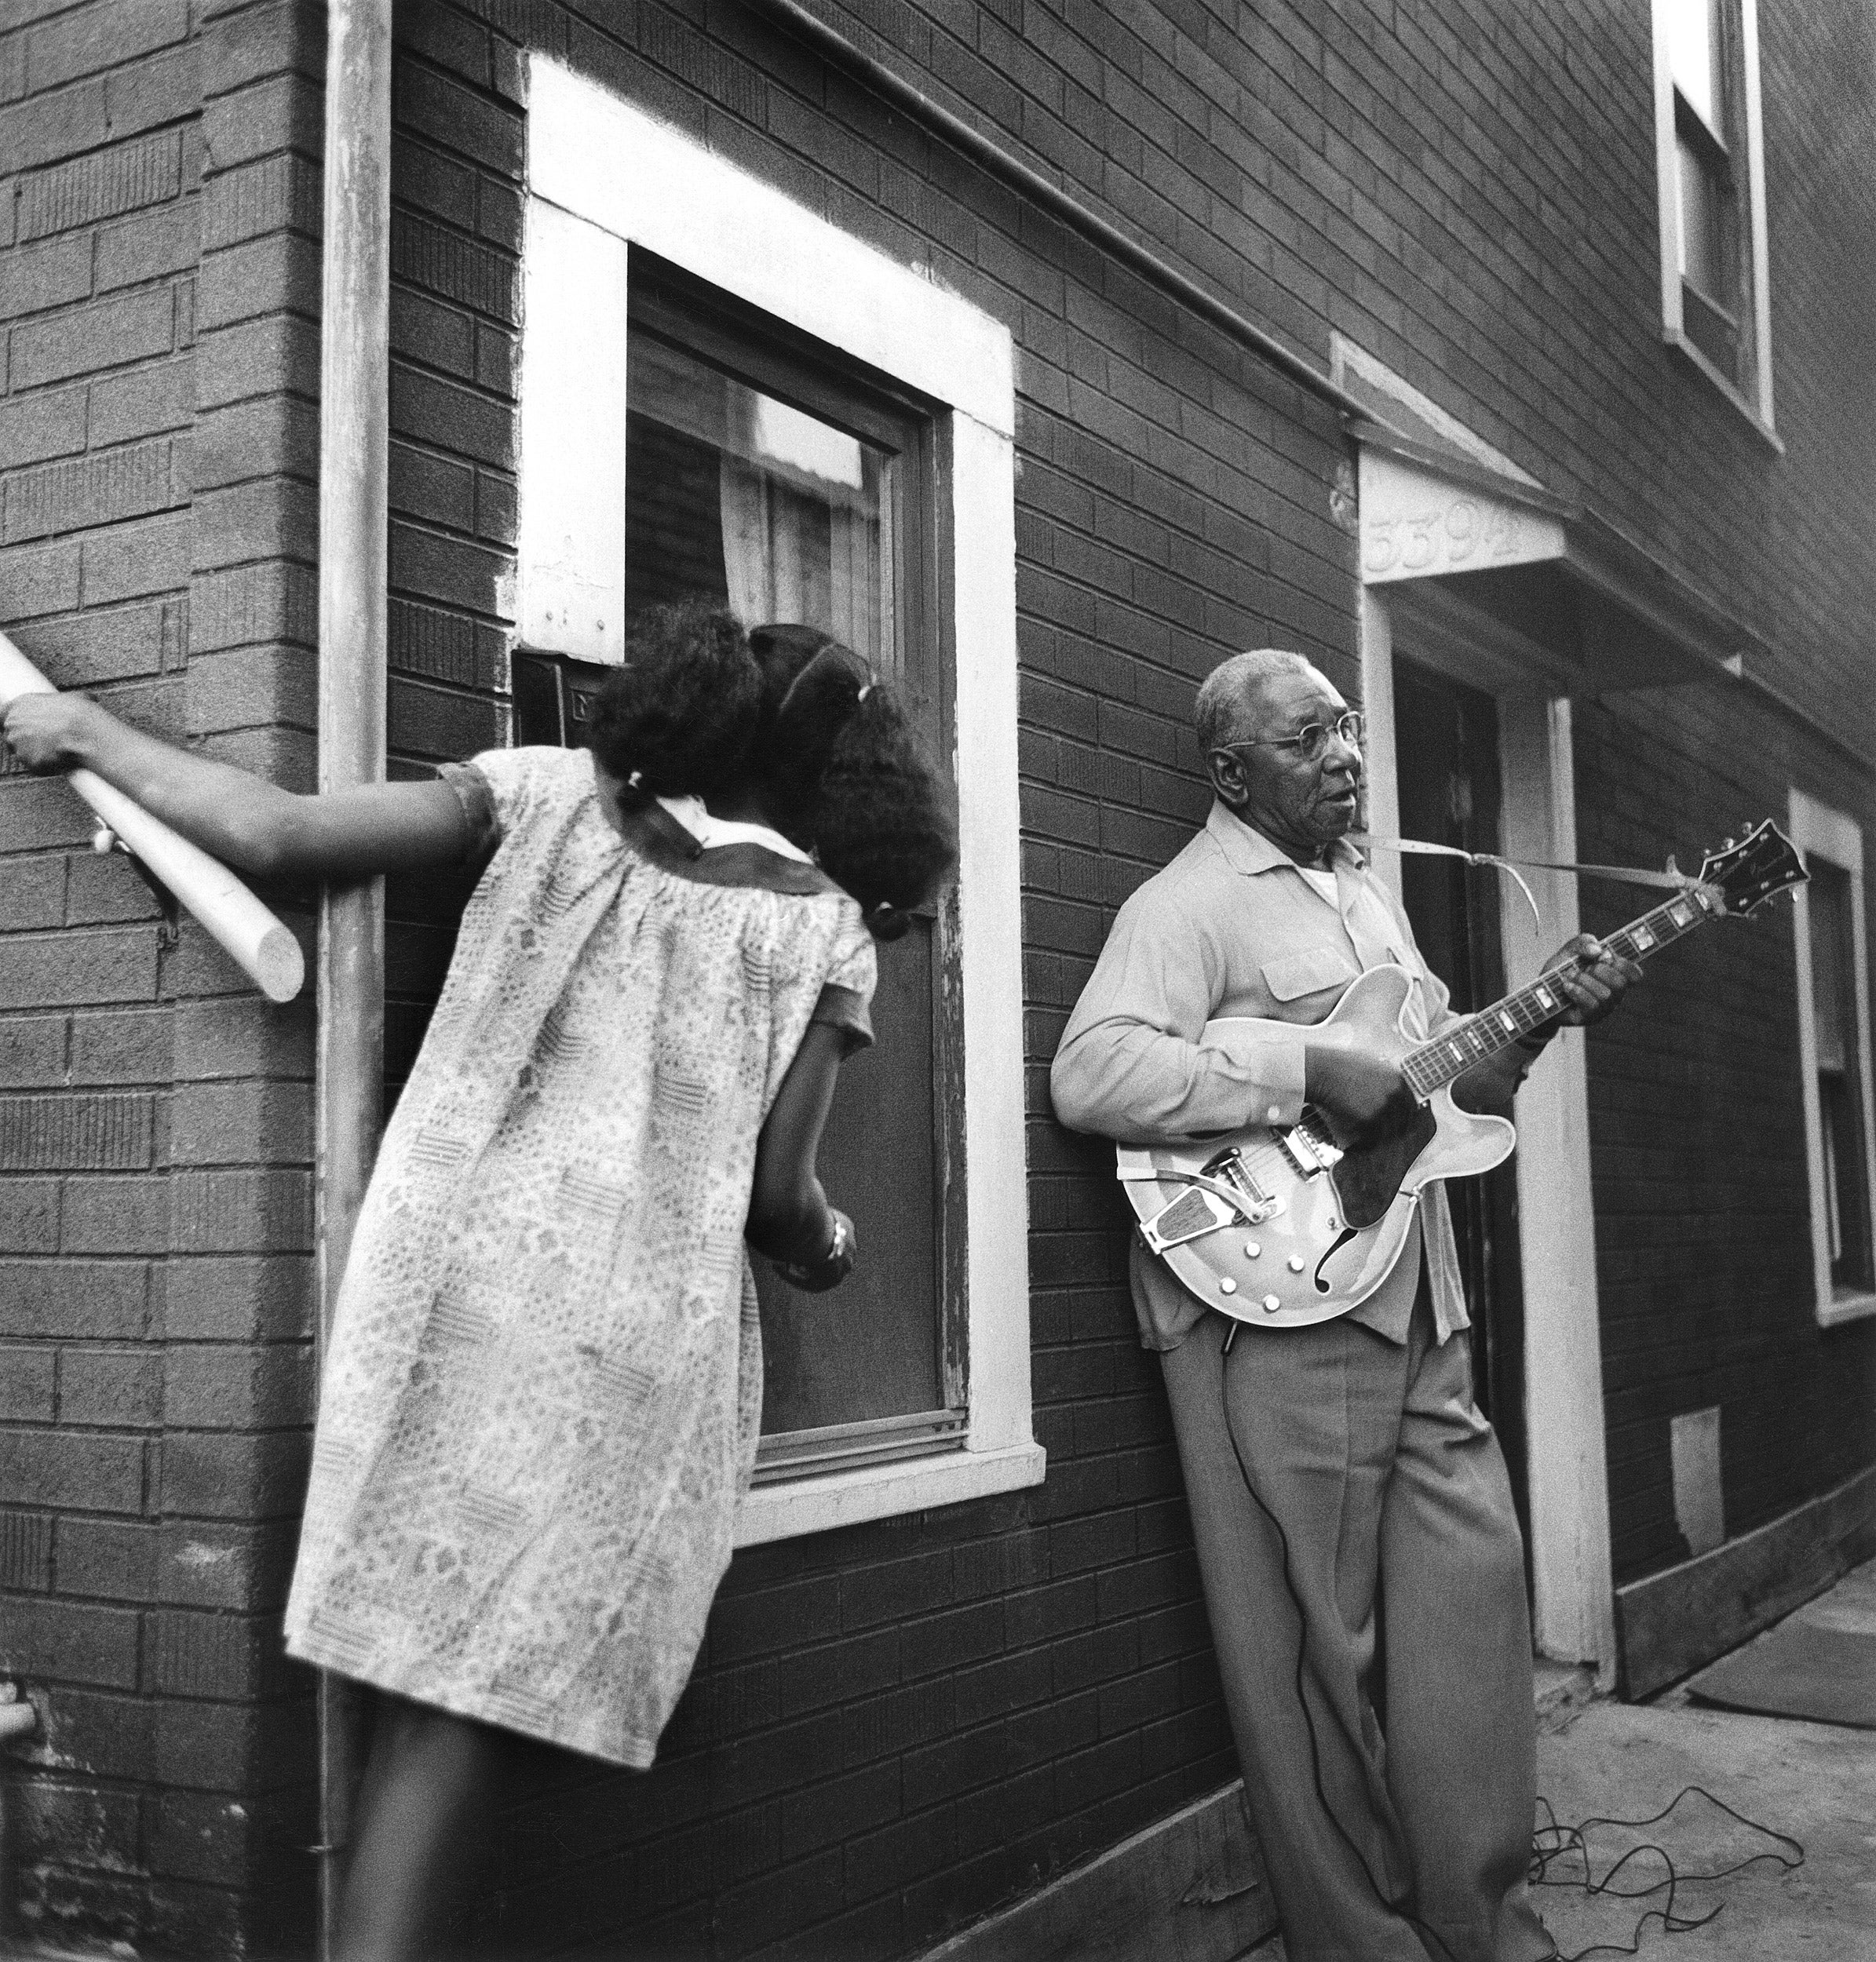 Girl watches man play guitar in 1965.